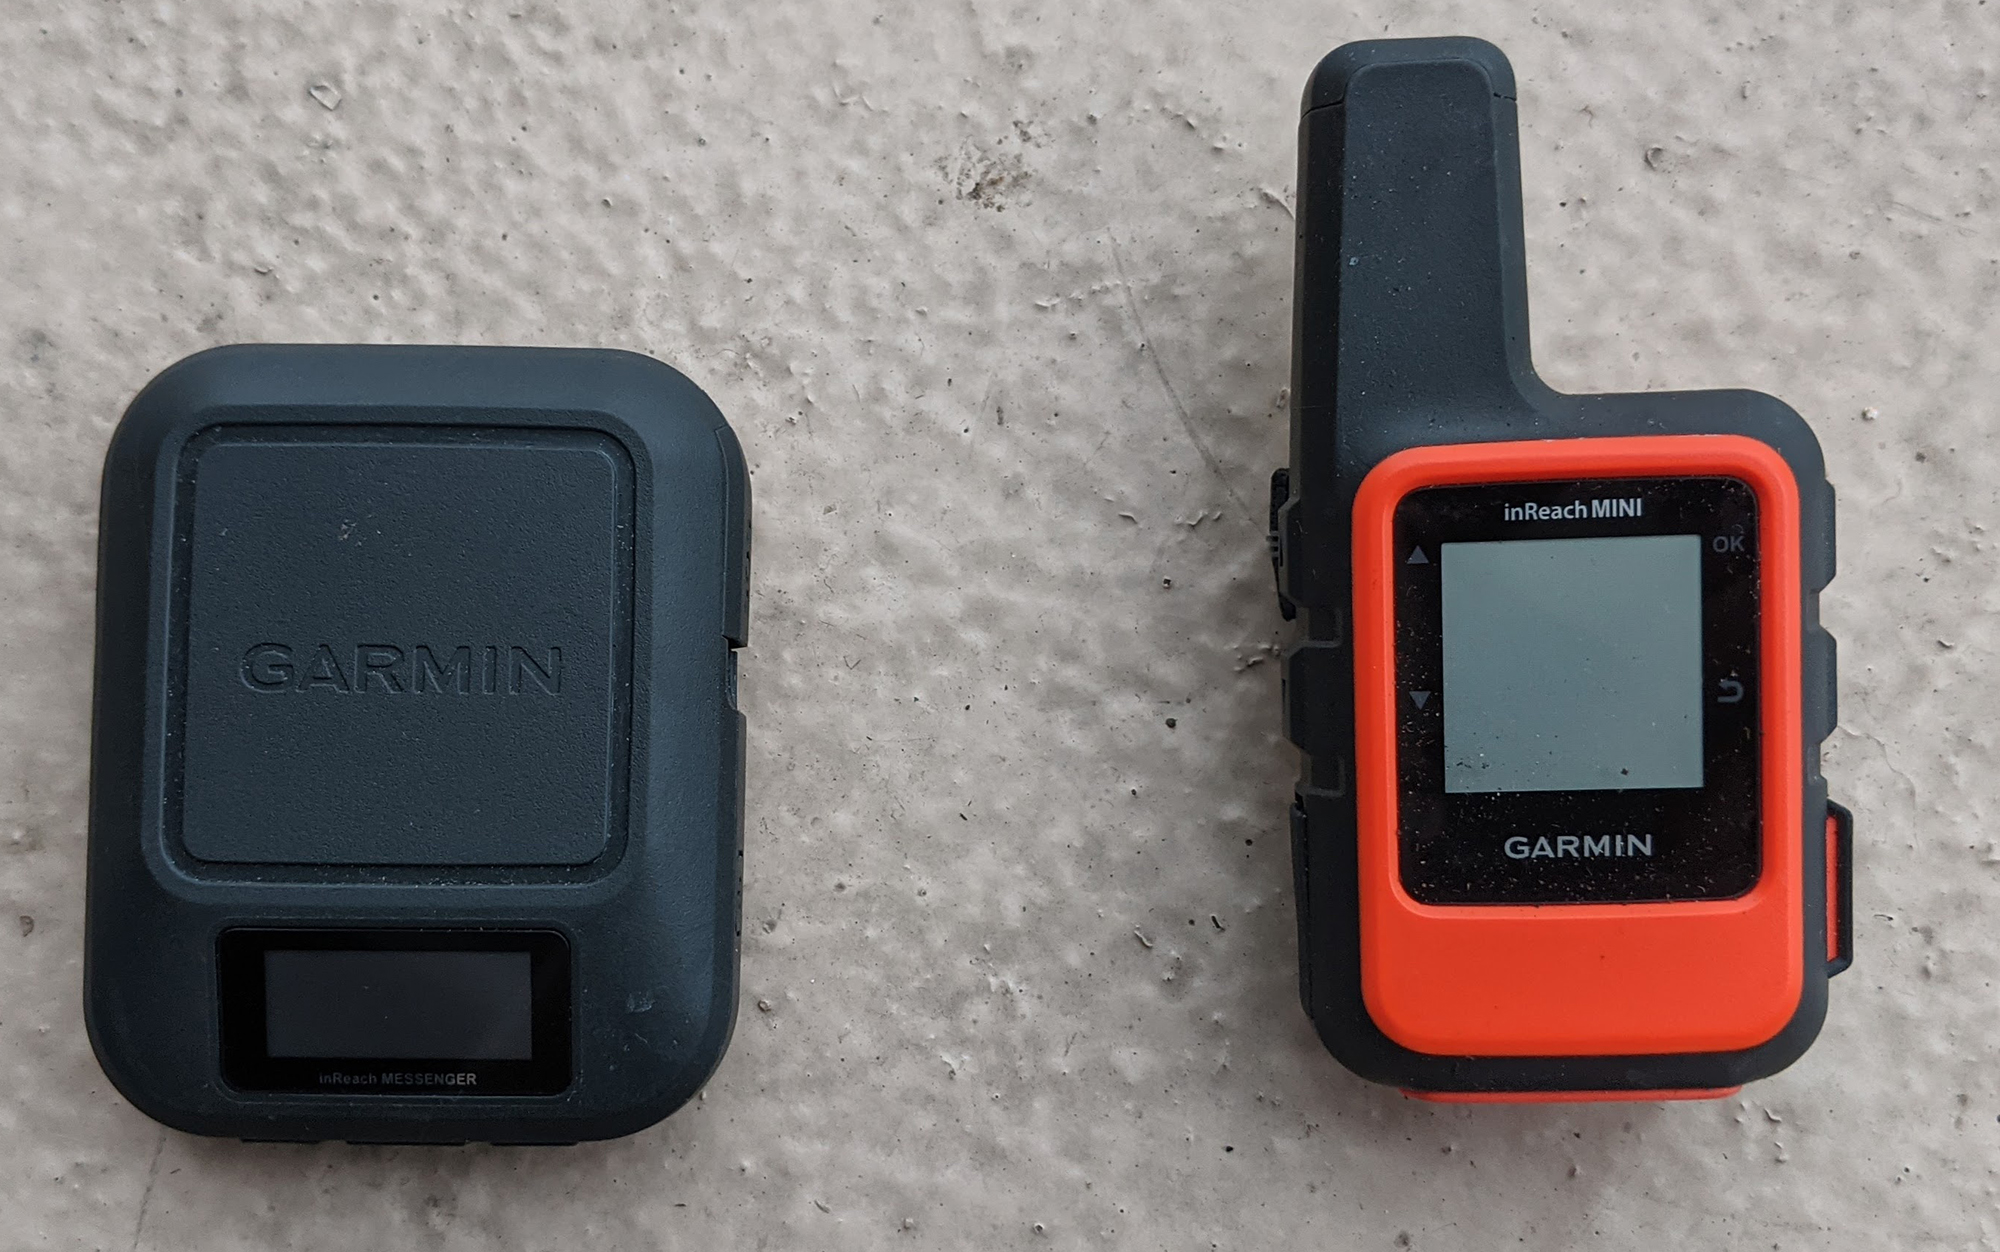 Compared to the Garmin inReach Mini 2, the Messenger has a much smaller screen and a much larger battery.